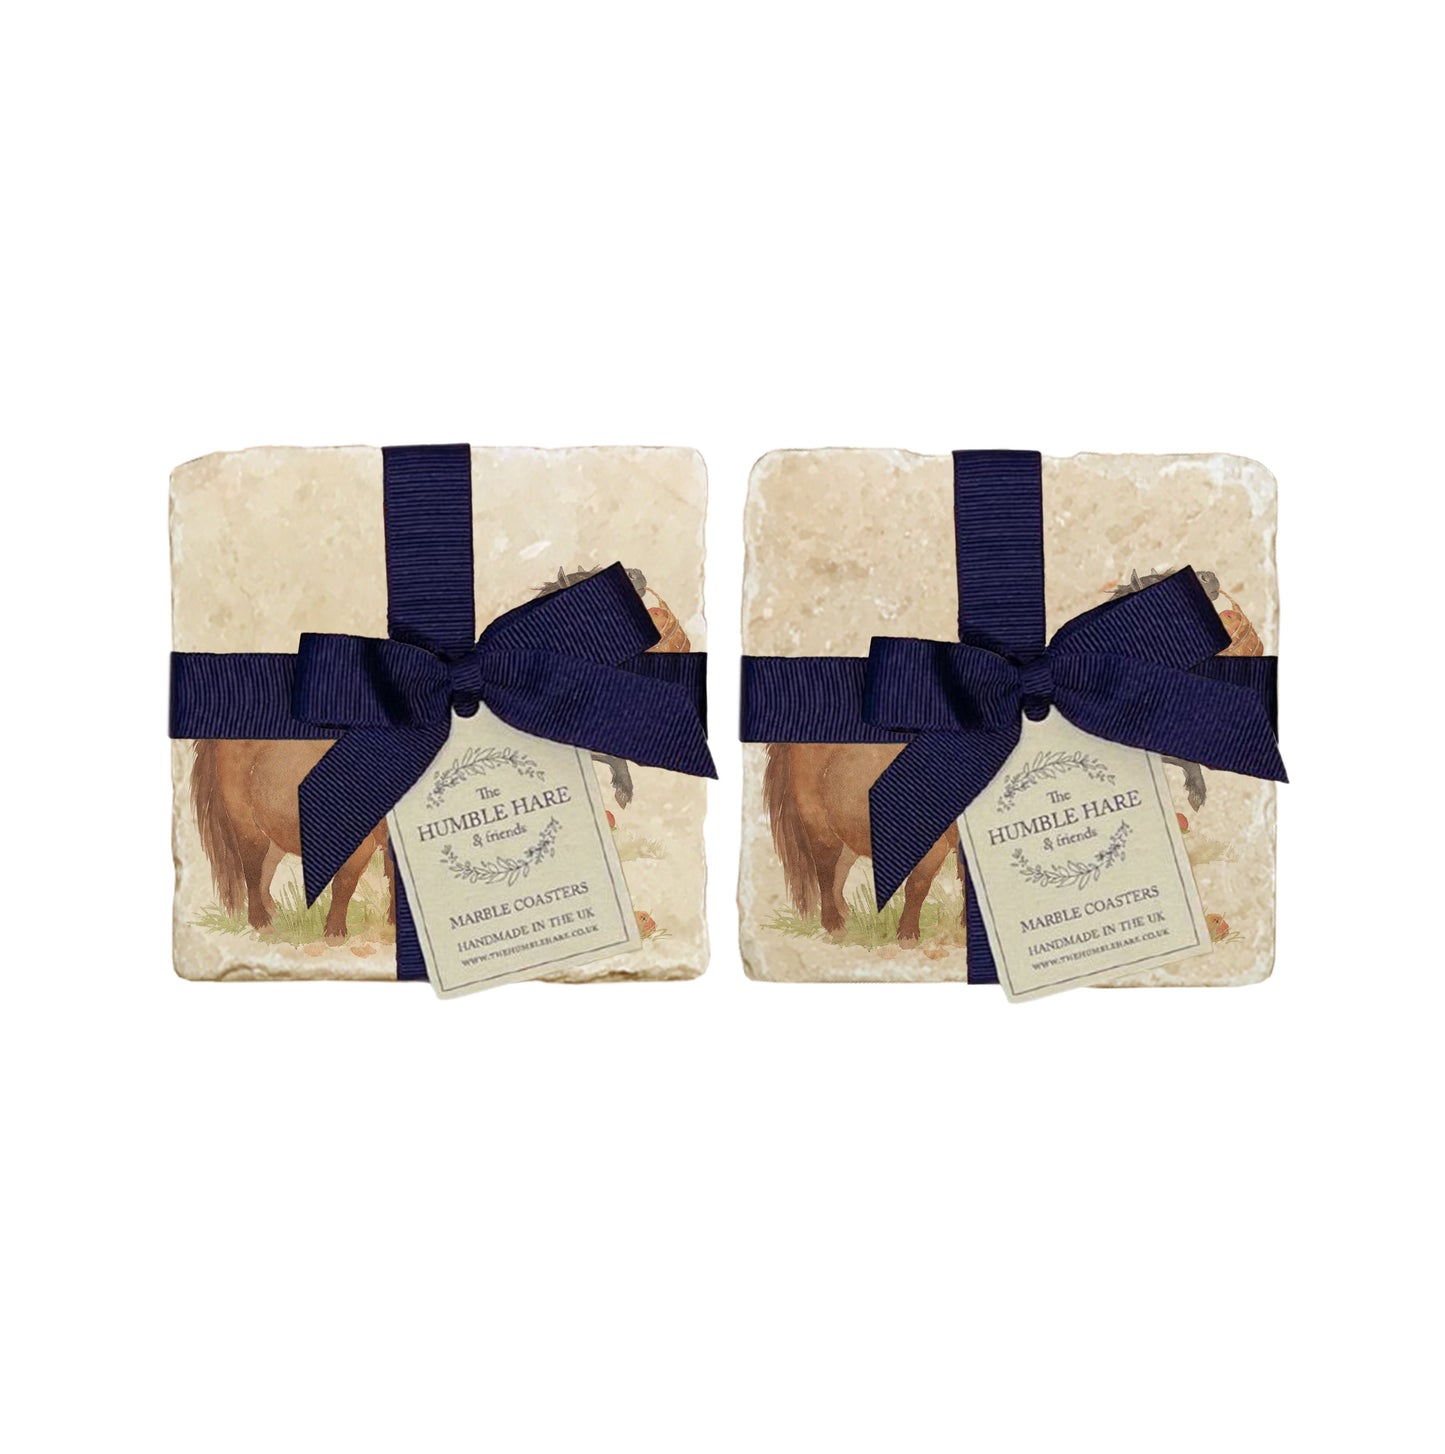 A set of 4 handmade marble coasters featuring a watercolour Shetland pony design, packaged in 2 pairs, with a luxurious blue bow and gift tag.